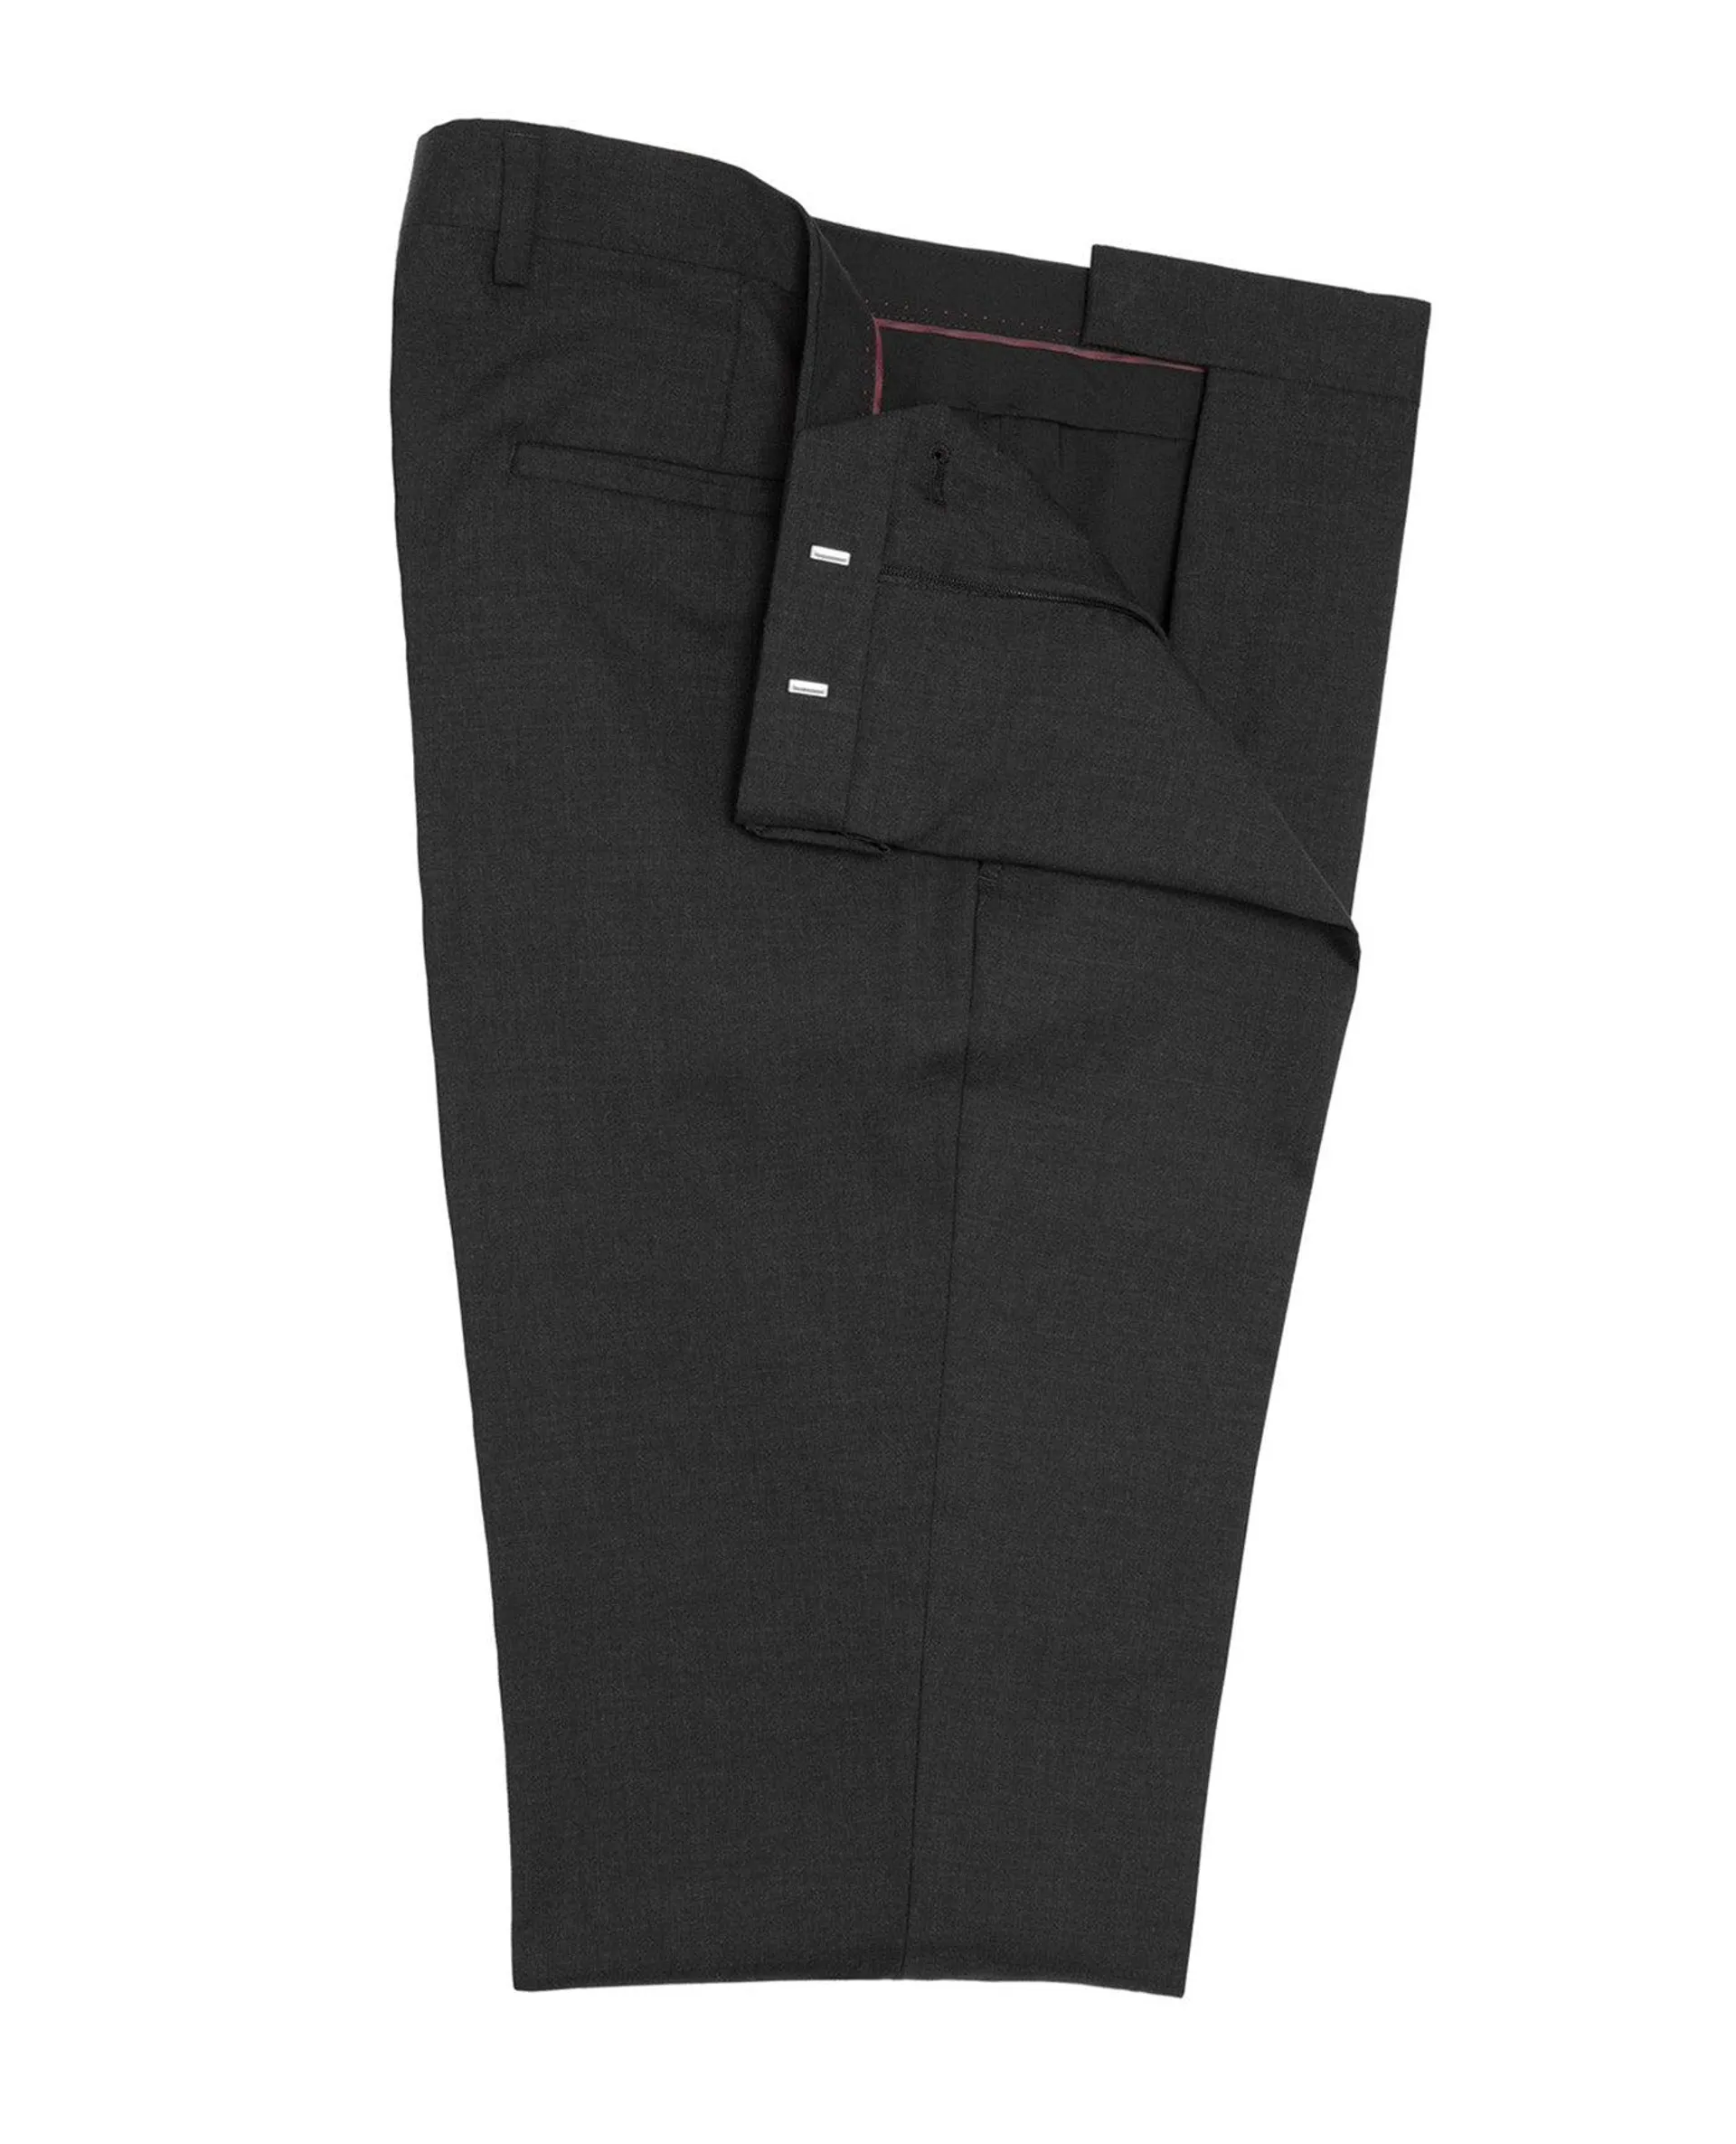 Flat Front Hoxton Trousers Plain Weave Charcoal Grey